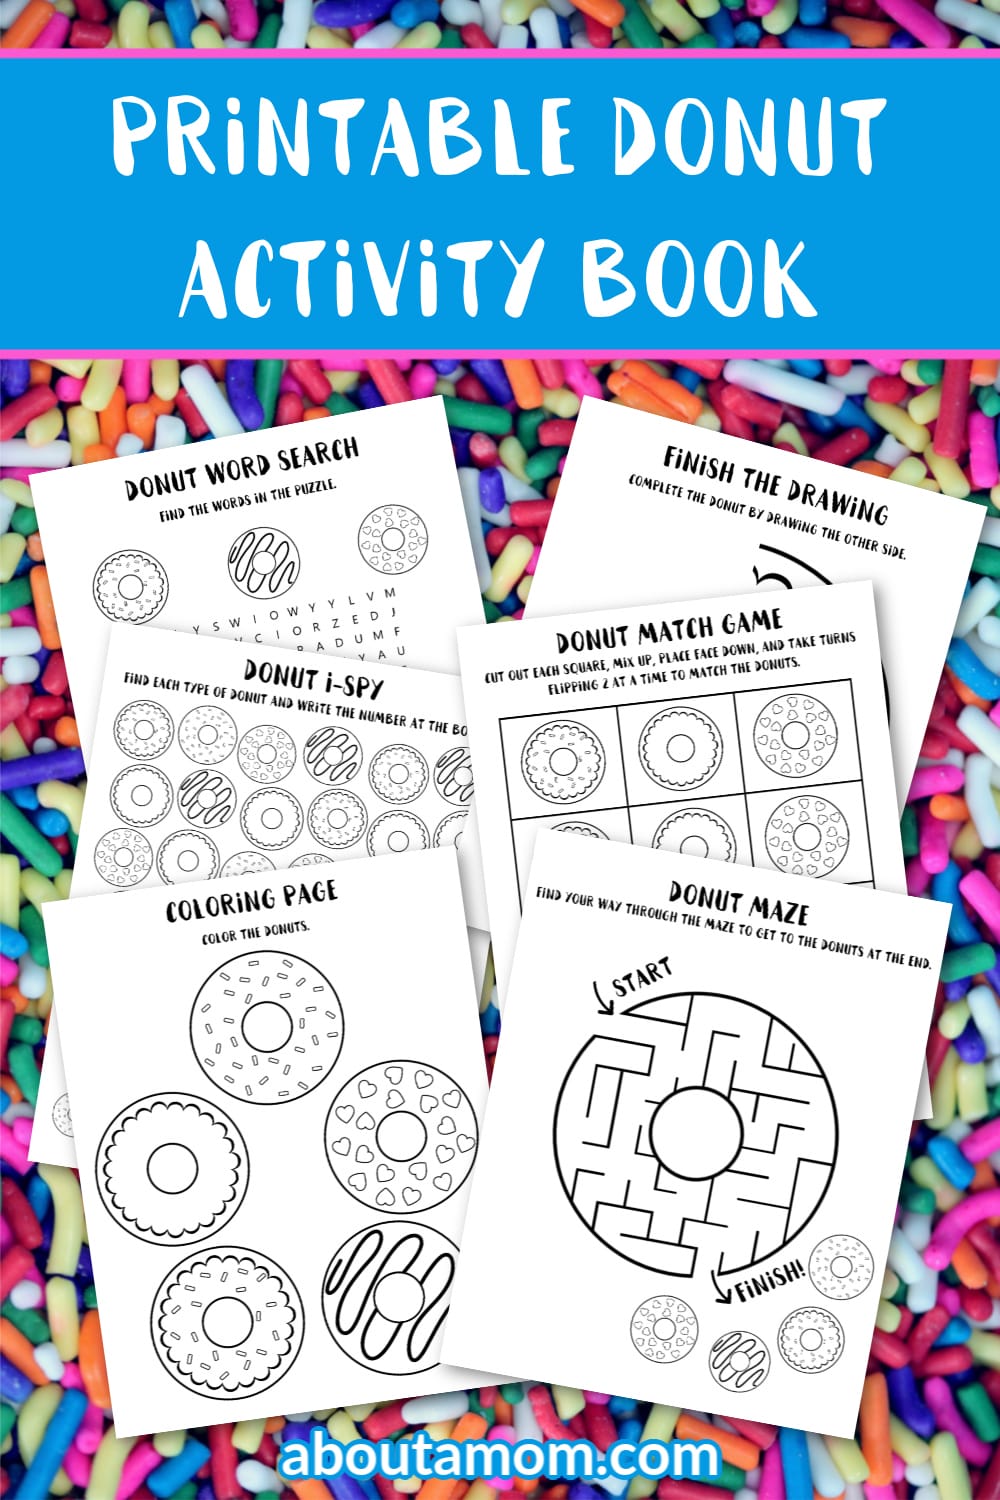 This free Donut Printable Activty Book has 6 fun donut-themed pages that includes an iSpy game, word search, coloring page, match game, donut maze, and finish the donut drawing activity. You can download and print them all or just one page. Download links are at the bottom of this page.